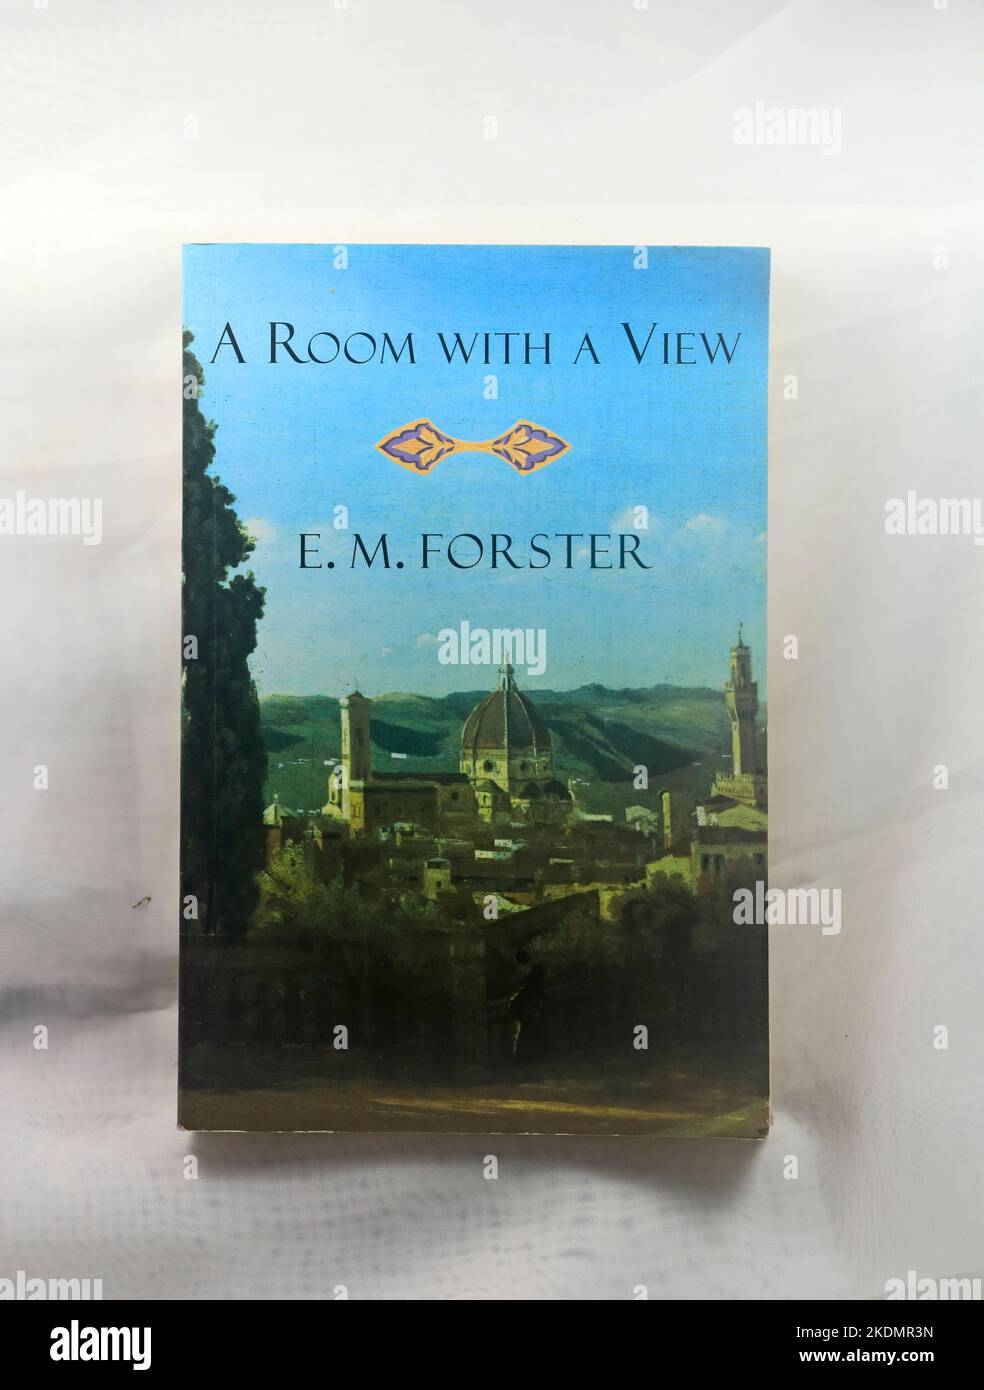 A Room With A View. E.M. Forster. Book cover. Studio set up. November 2022. Stock Photo